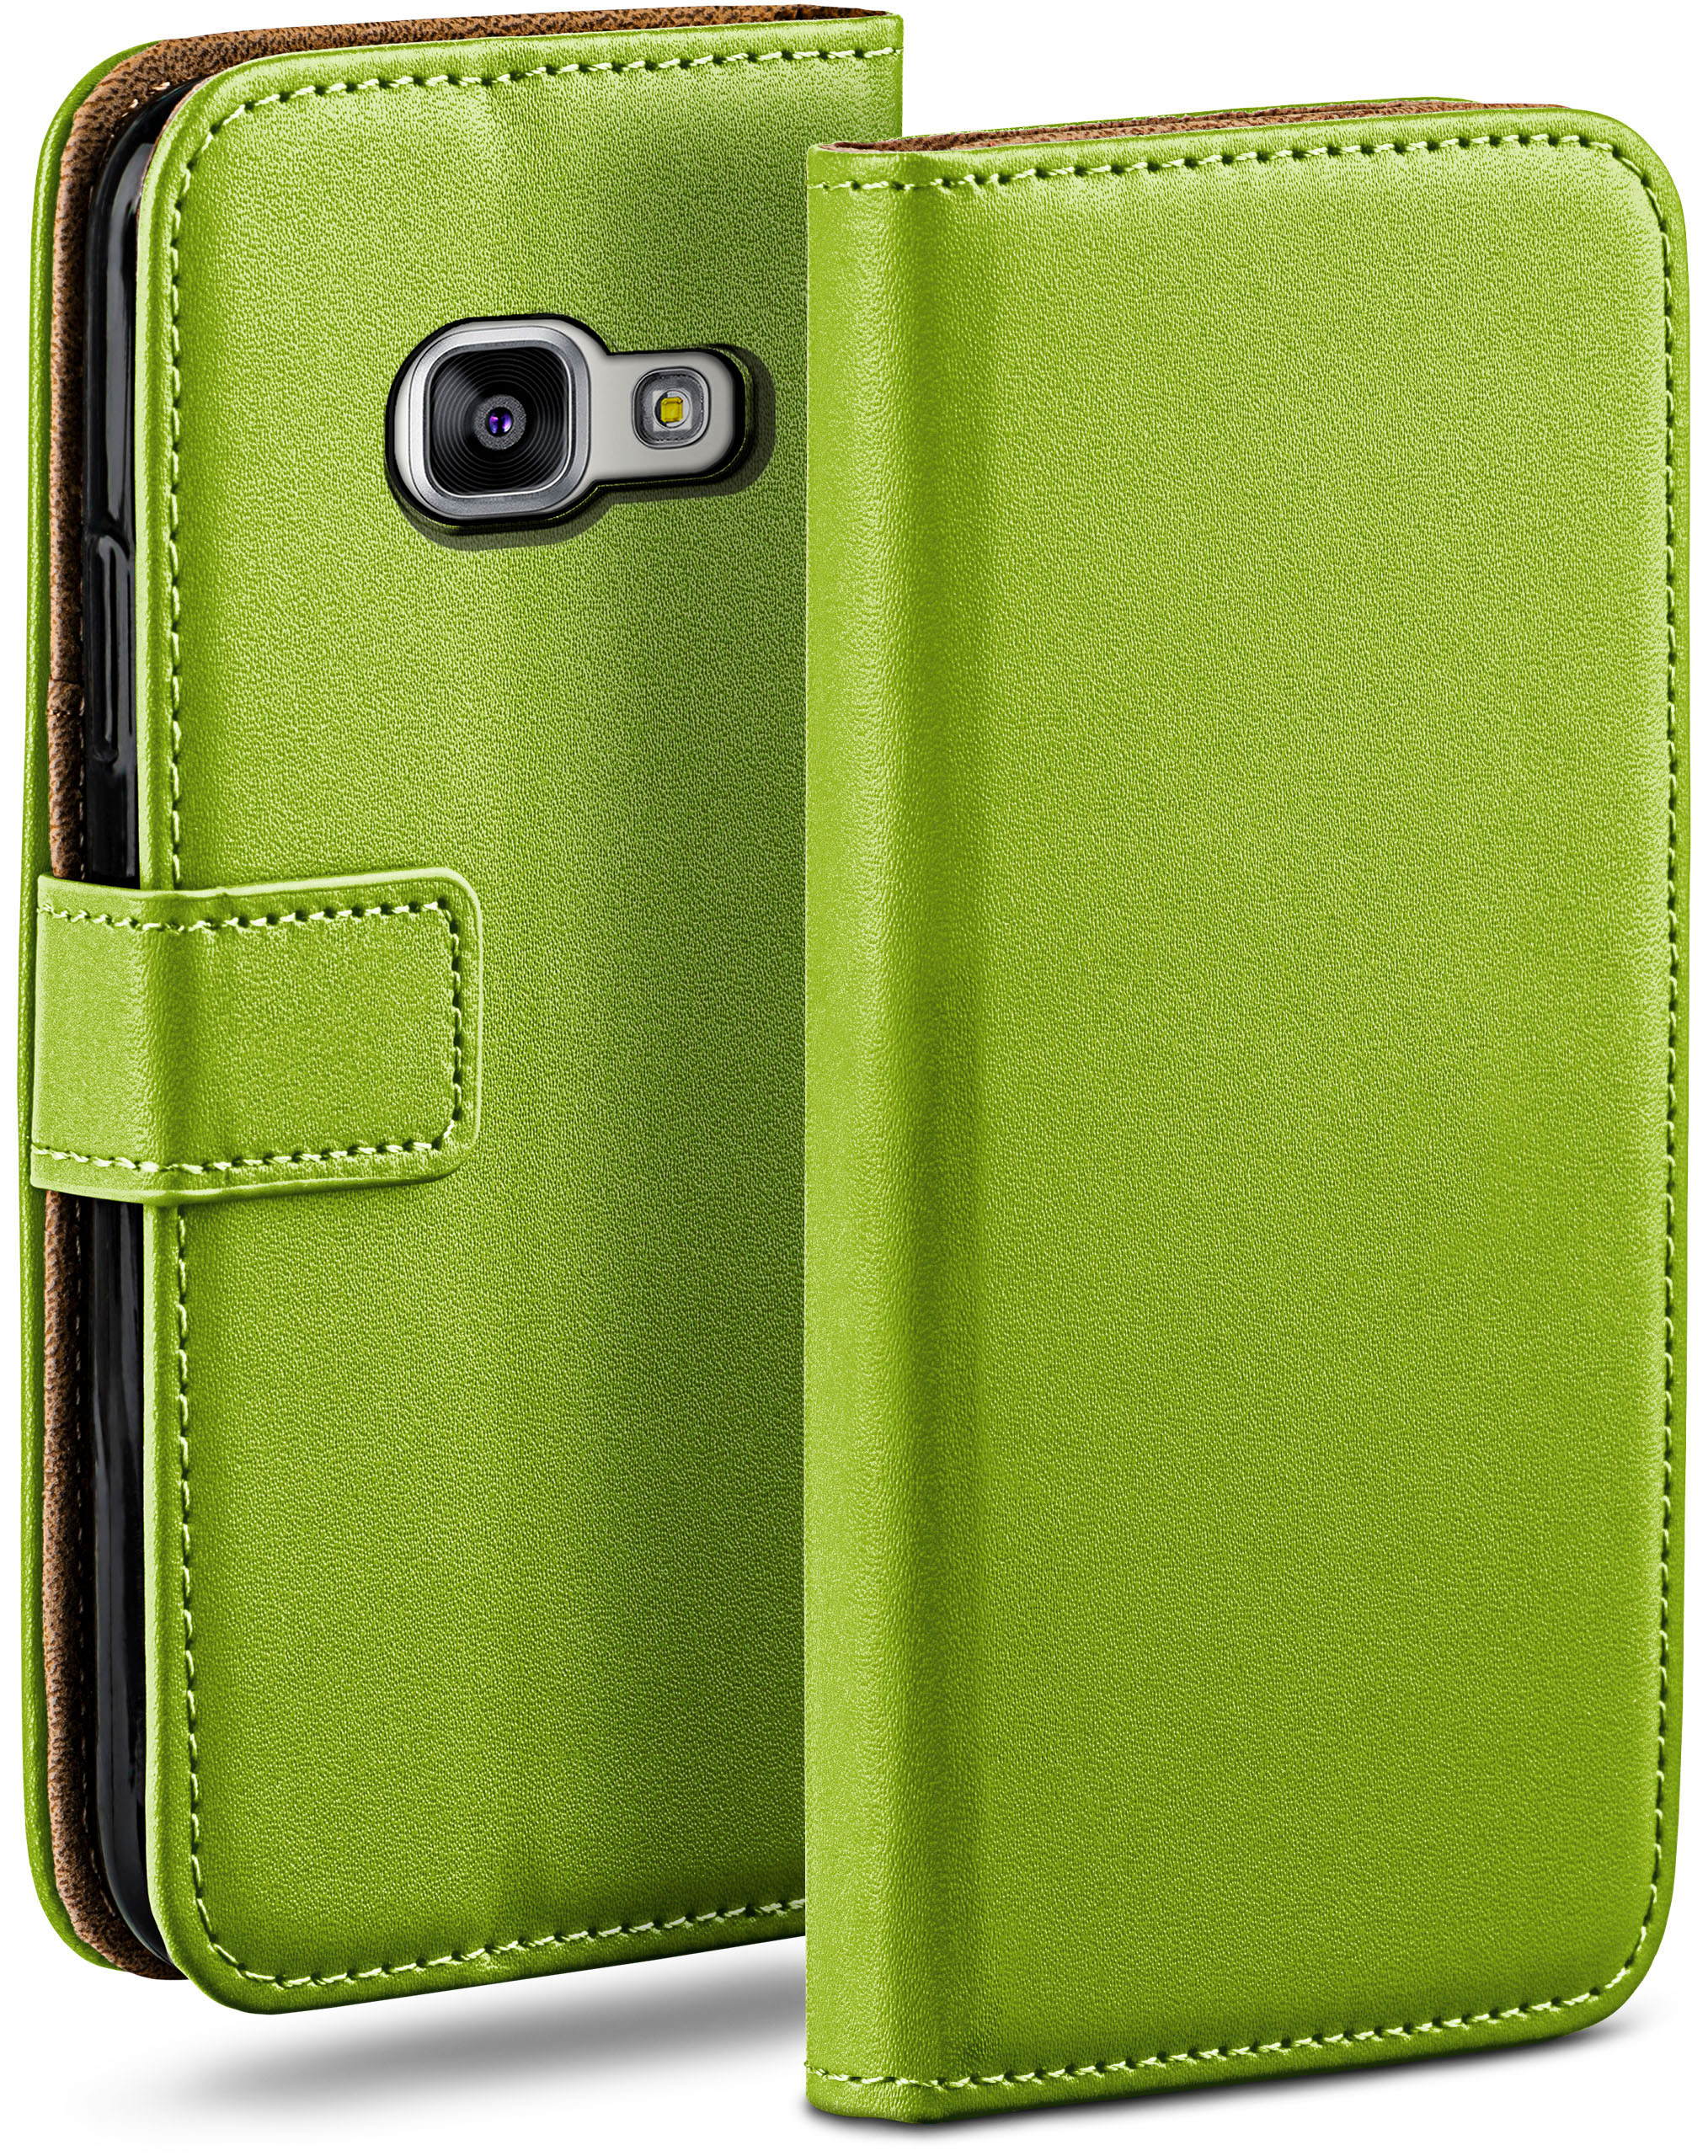 A5 Lime-Green Book Samsung, MOEX Case, Galaxy (2016), Bookcover,